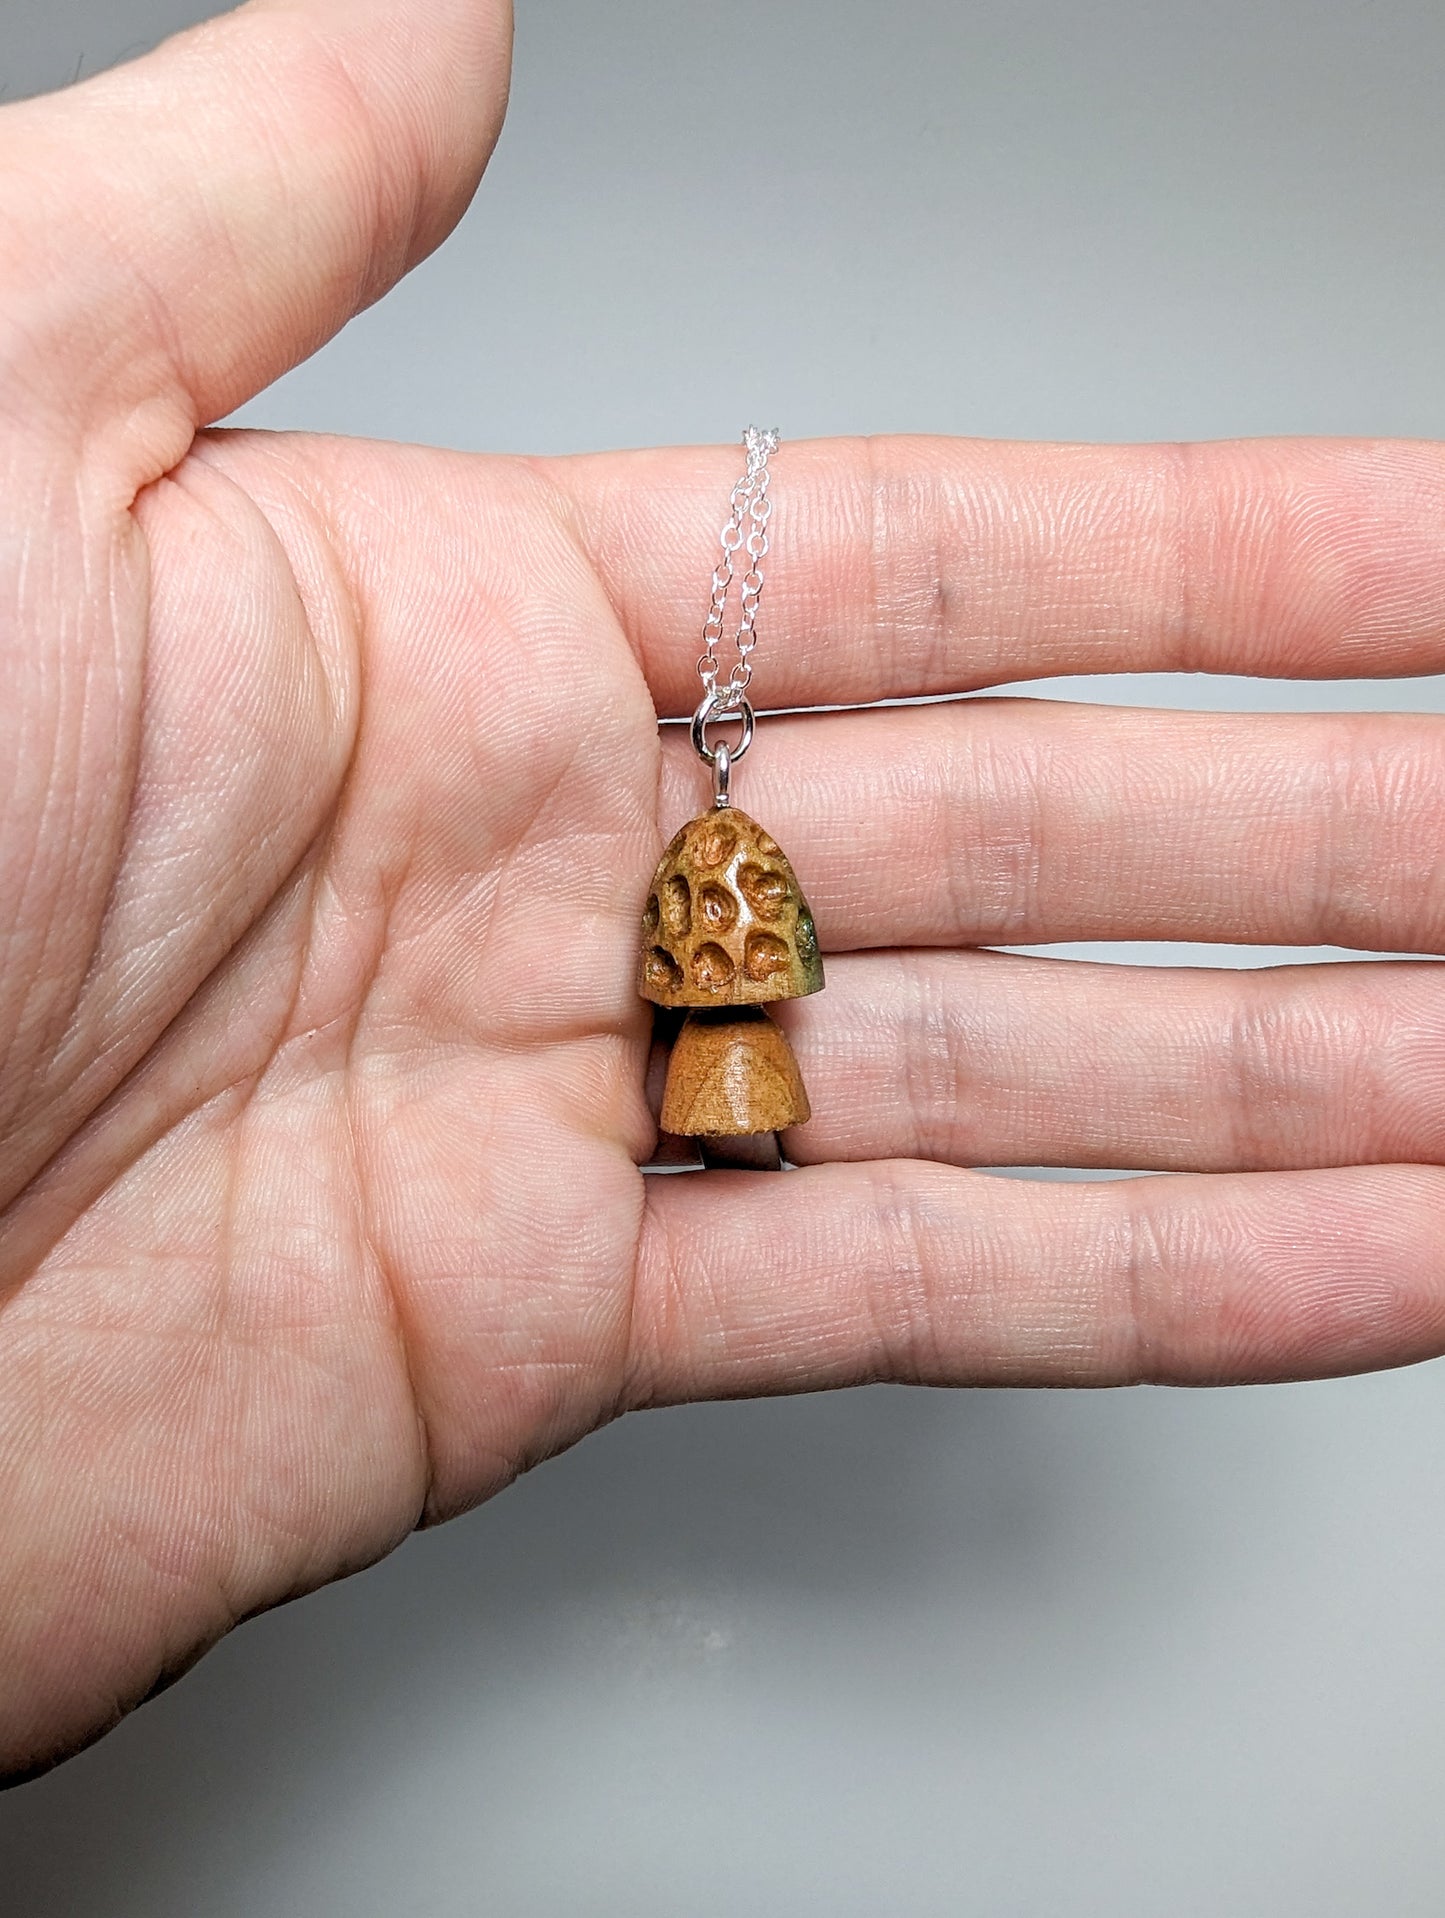 Naturally Fungus-Stained Wooden Pendant | Morel Mushroom #10